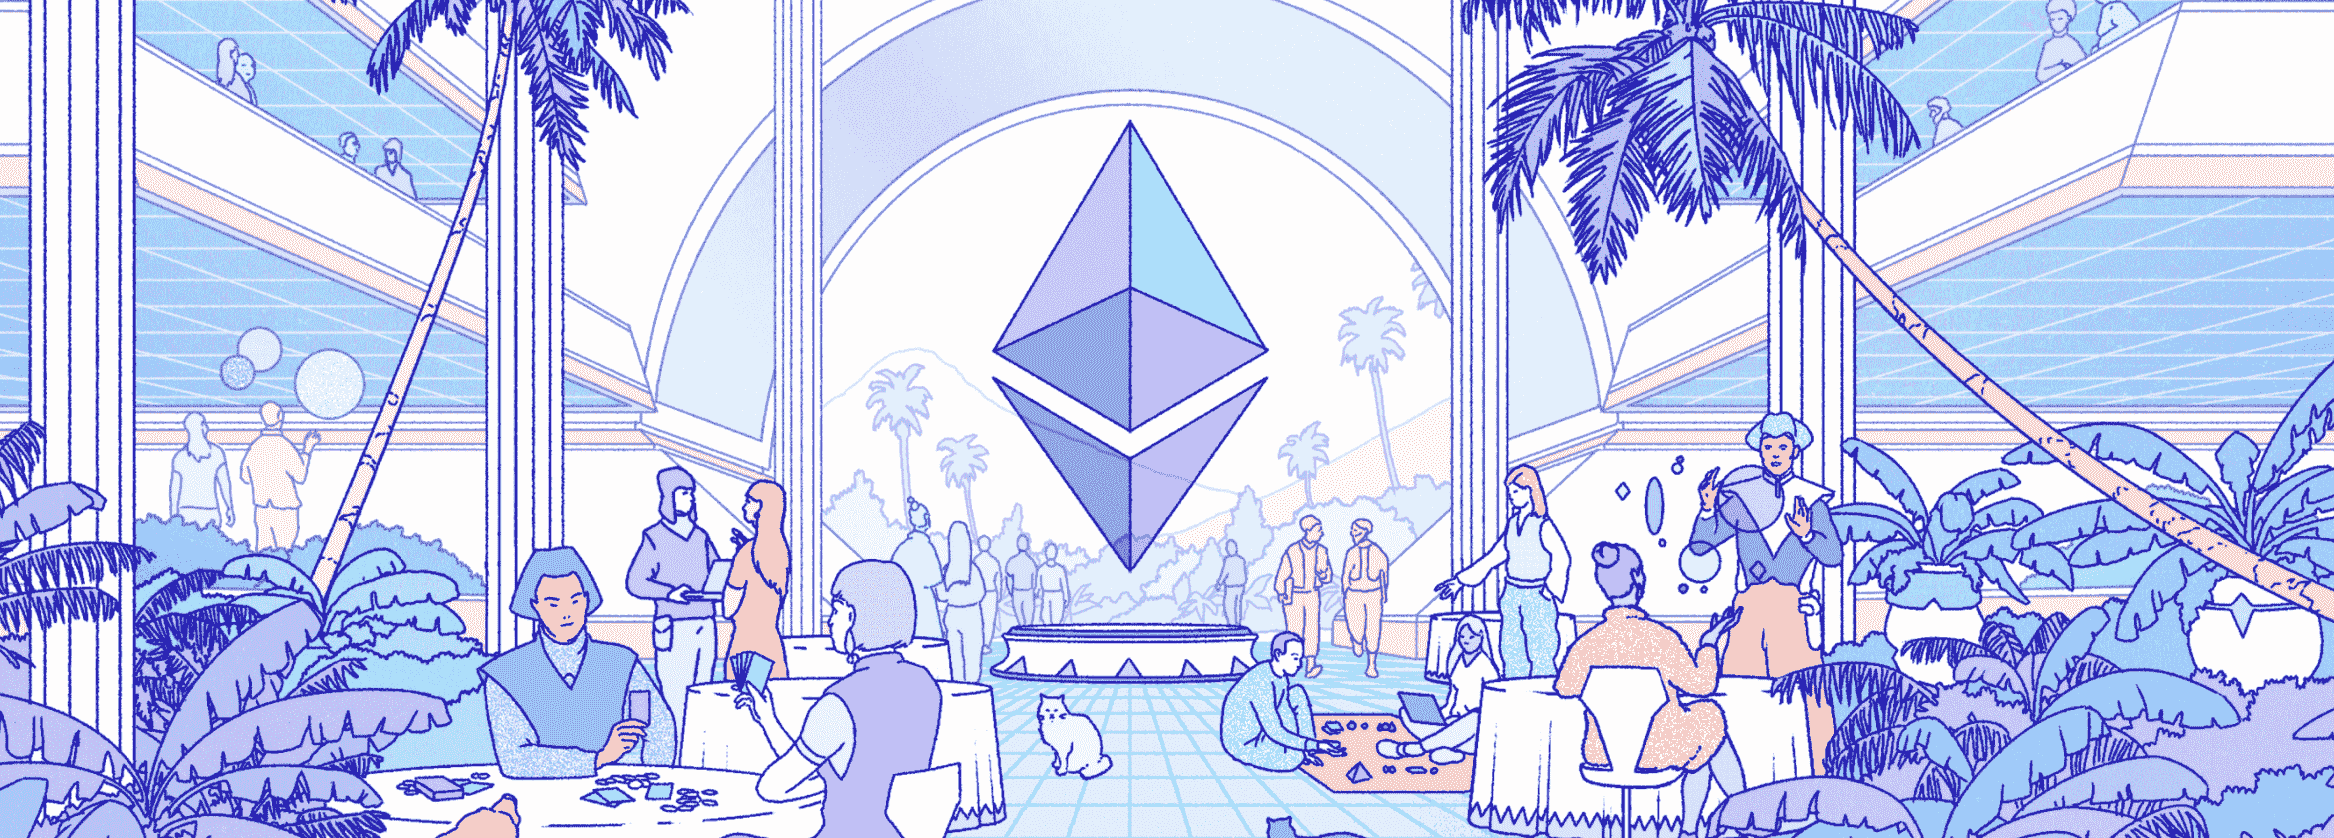 buy ethereum best cryptocurrency to invest in 2021 for long growth